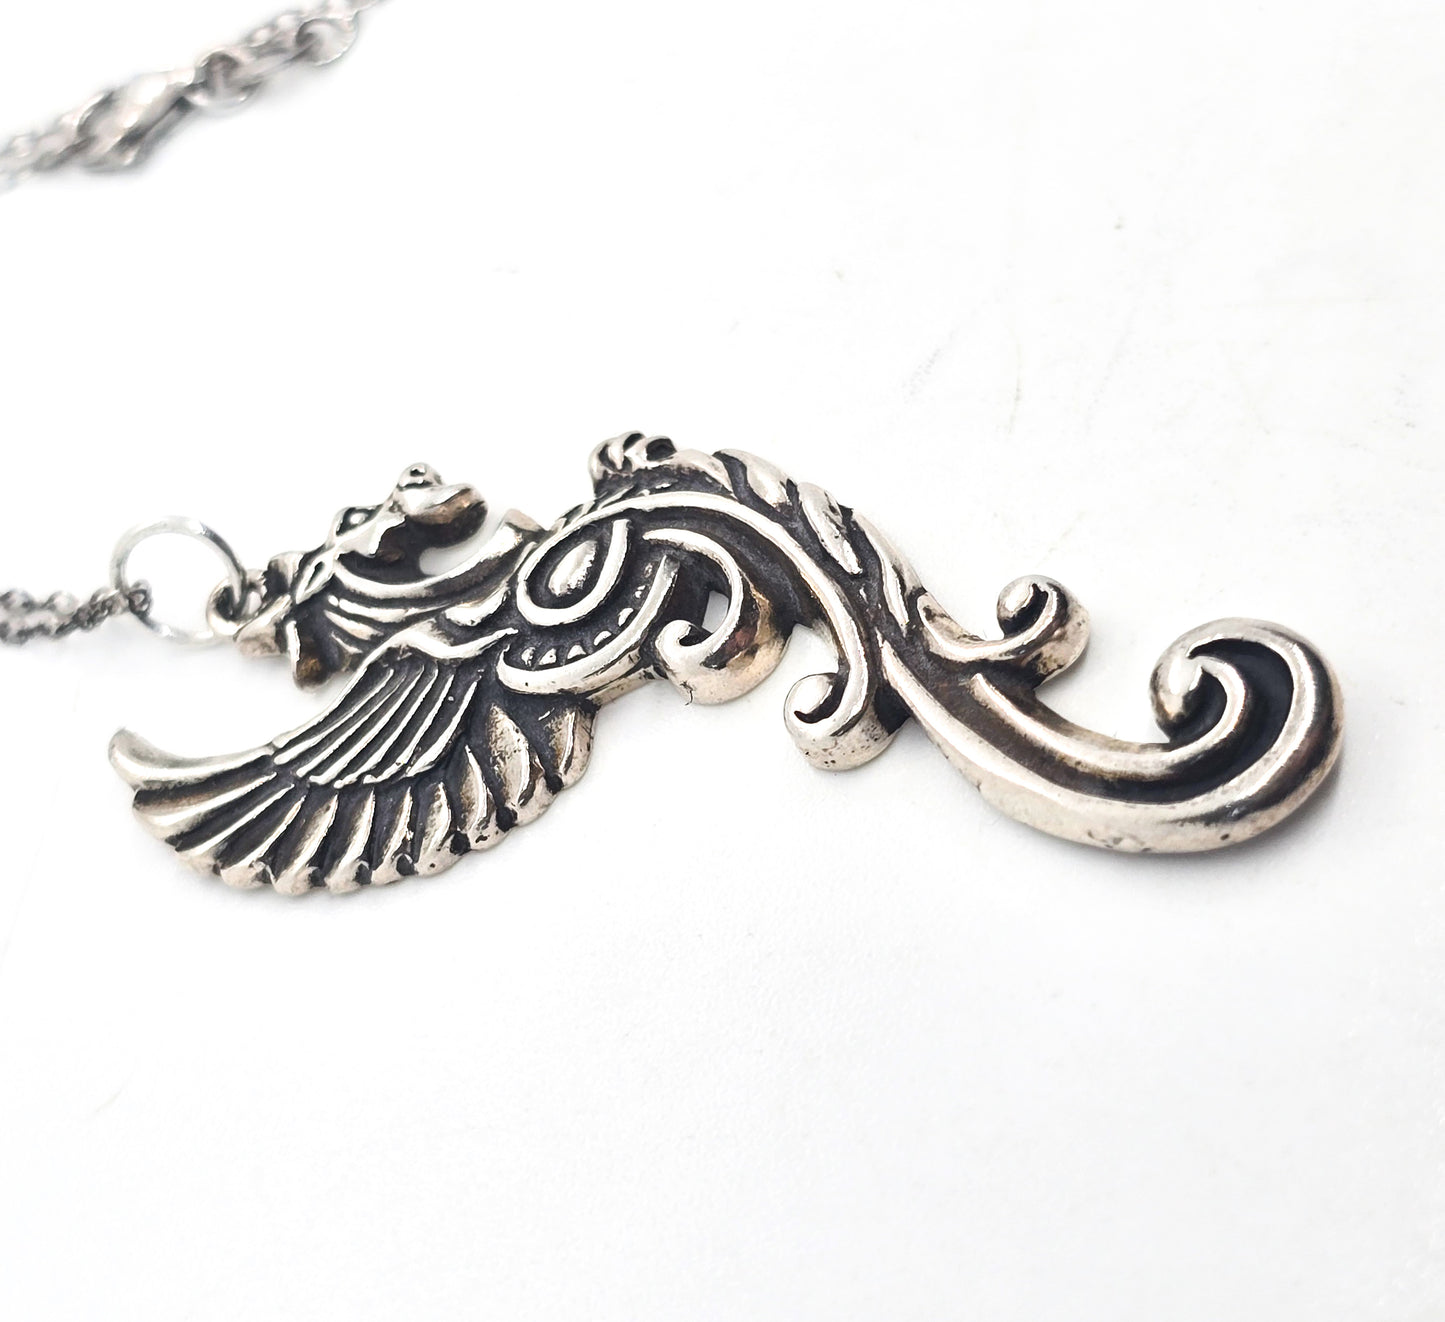 Tribal dragon large winged sterling silver pendant necklace